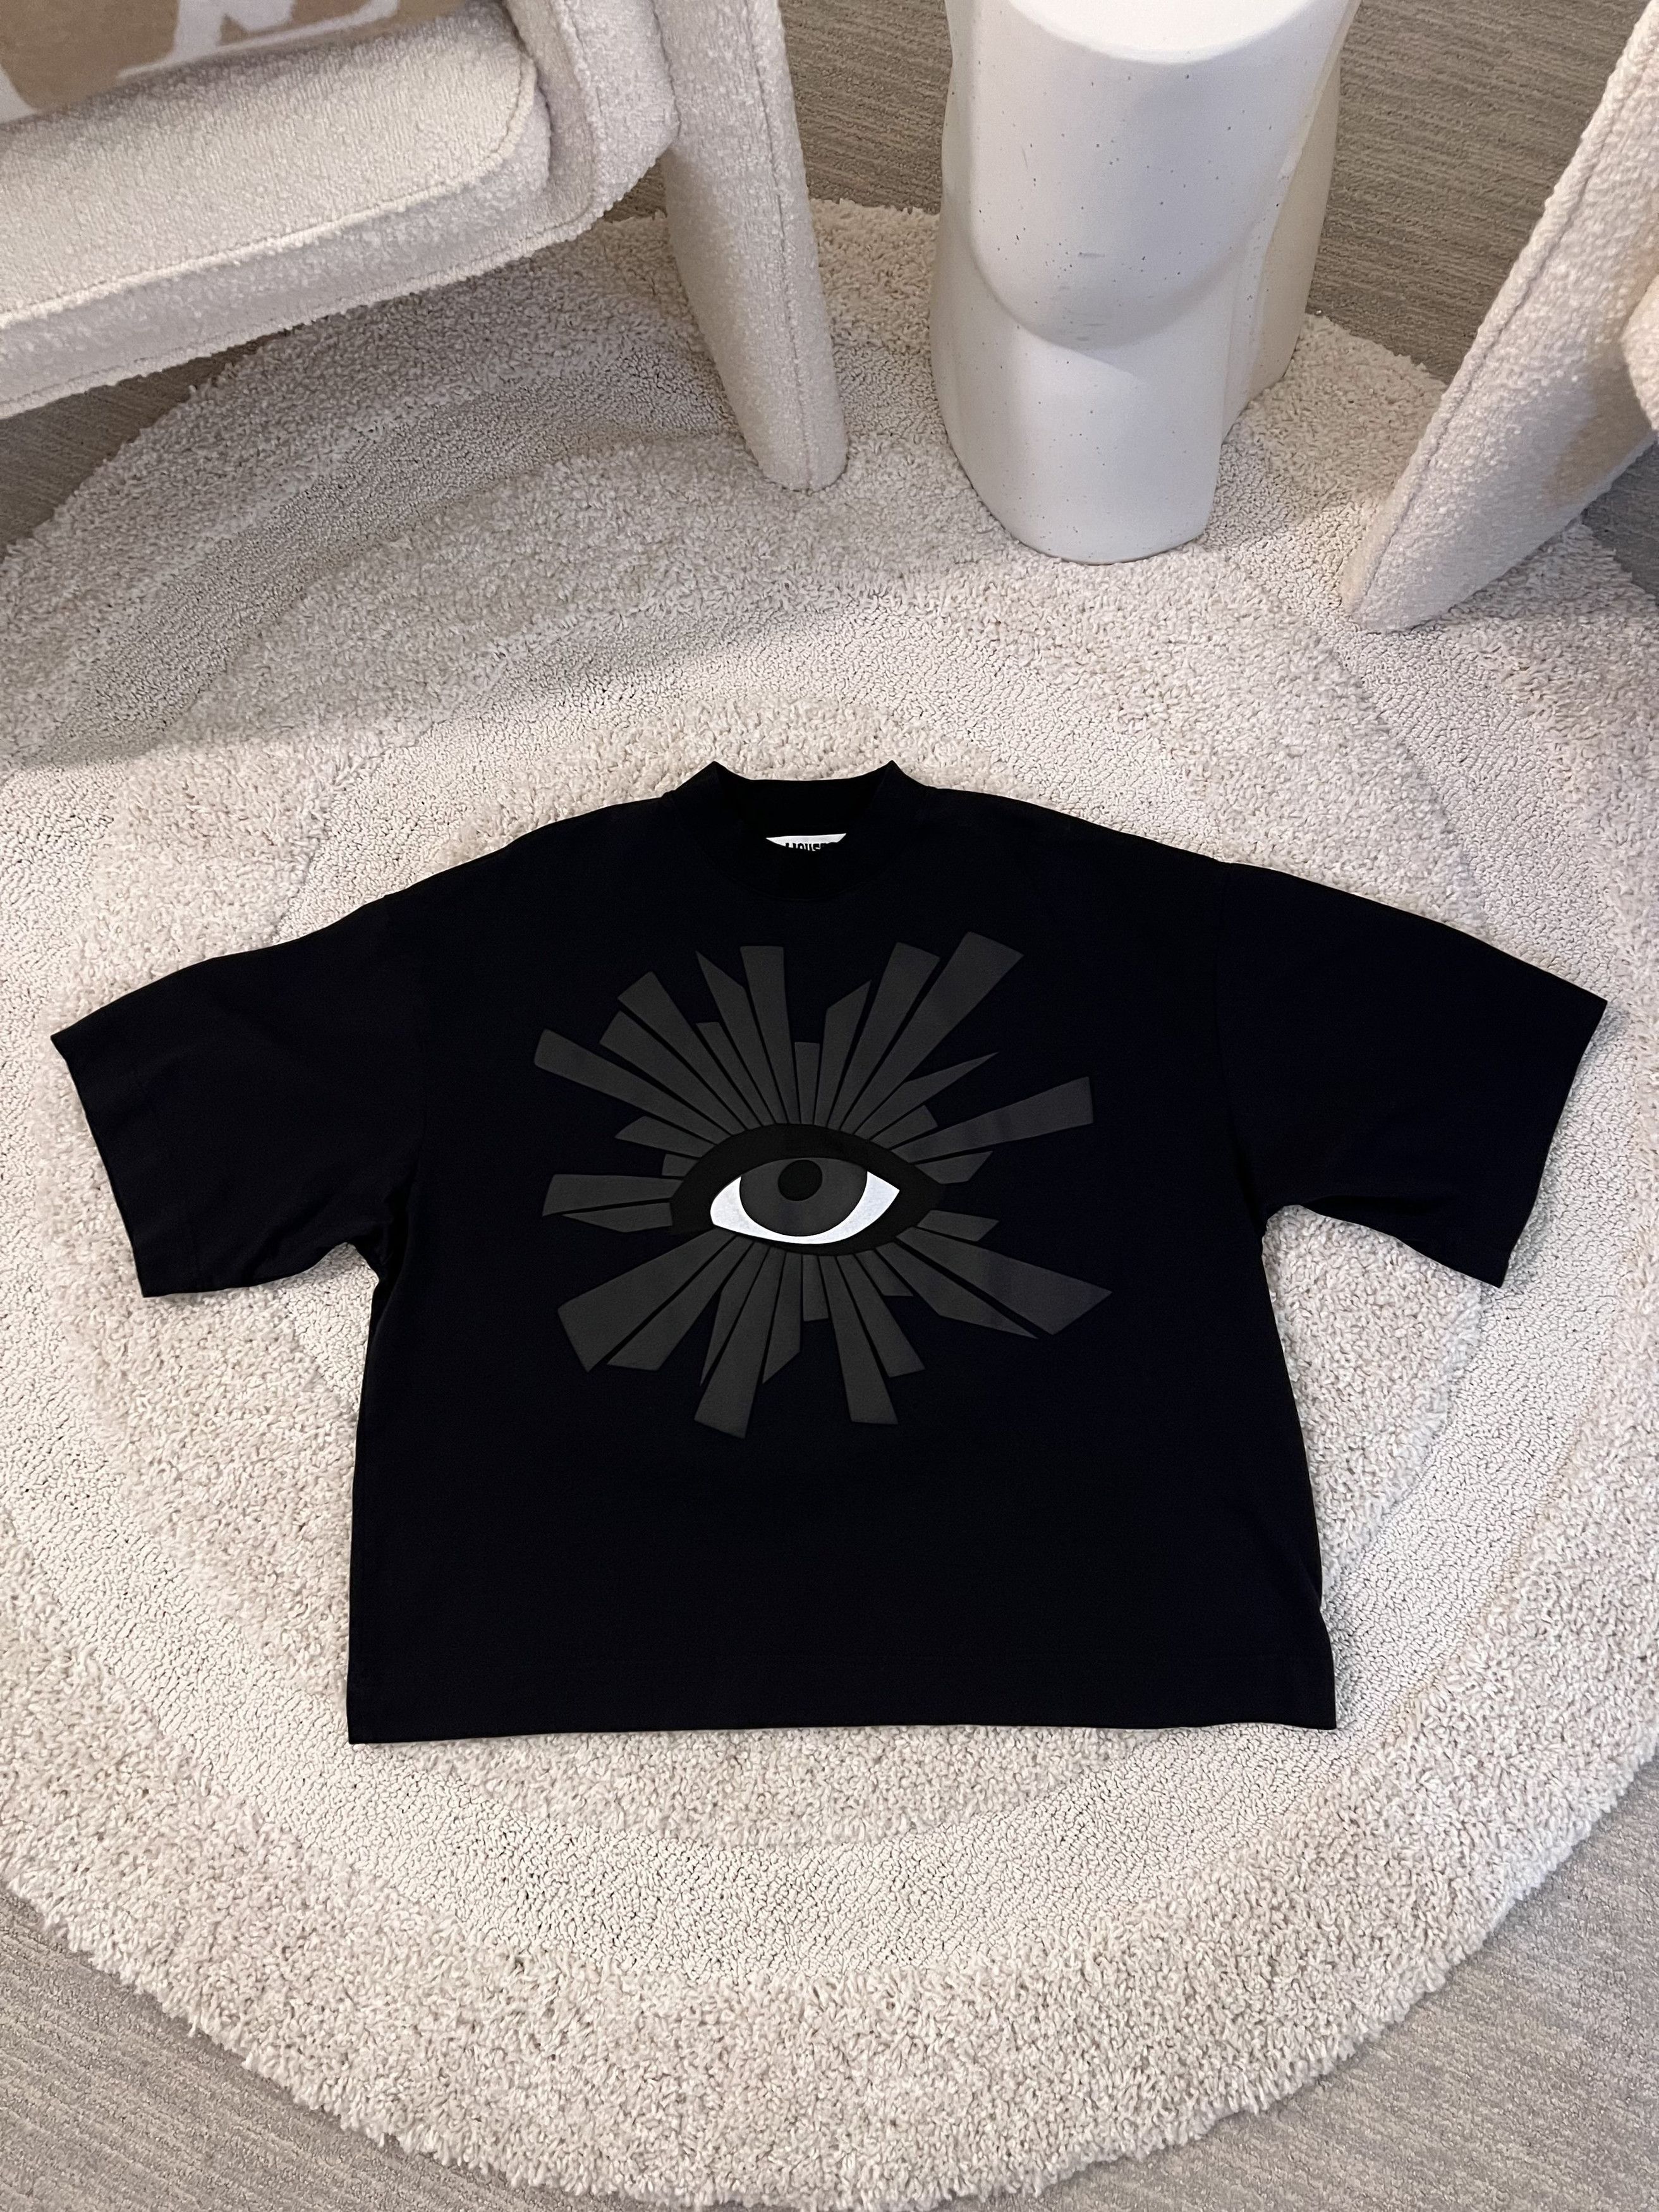 House of Errors House of Errors ALL-SEEING HEAVYWEIGHT TEES | Grailed